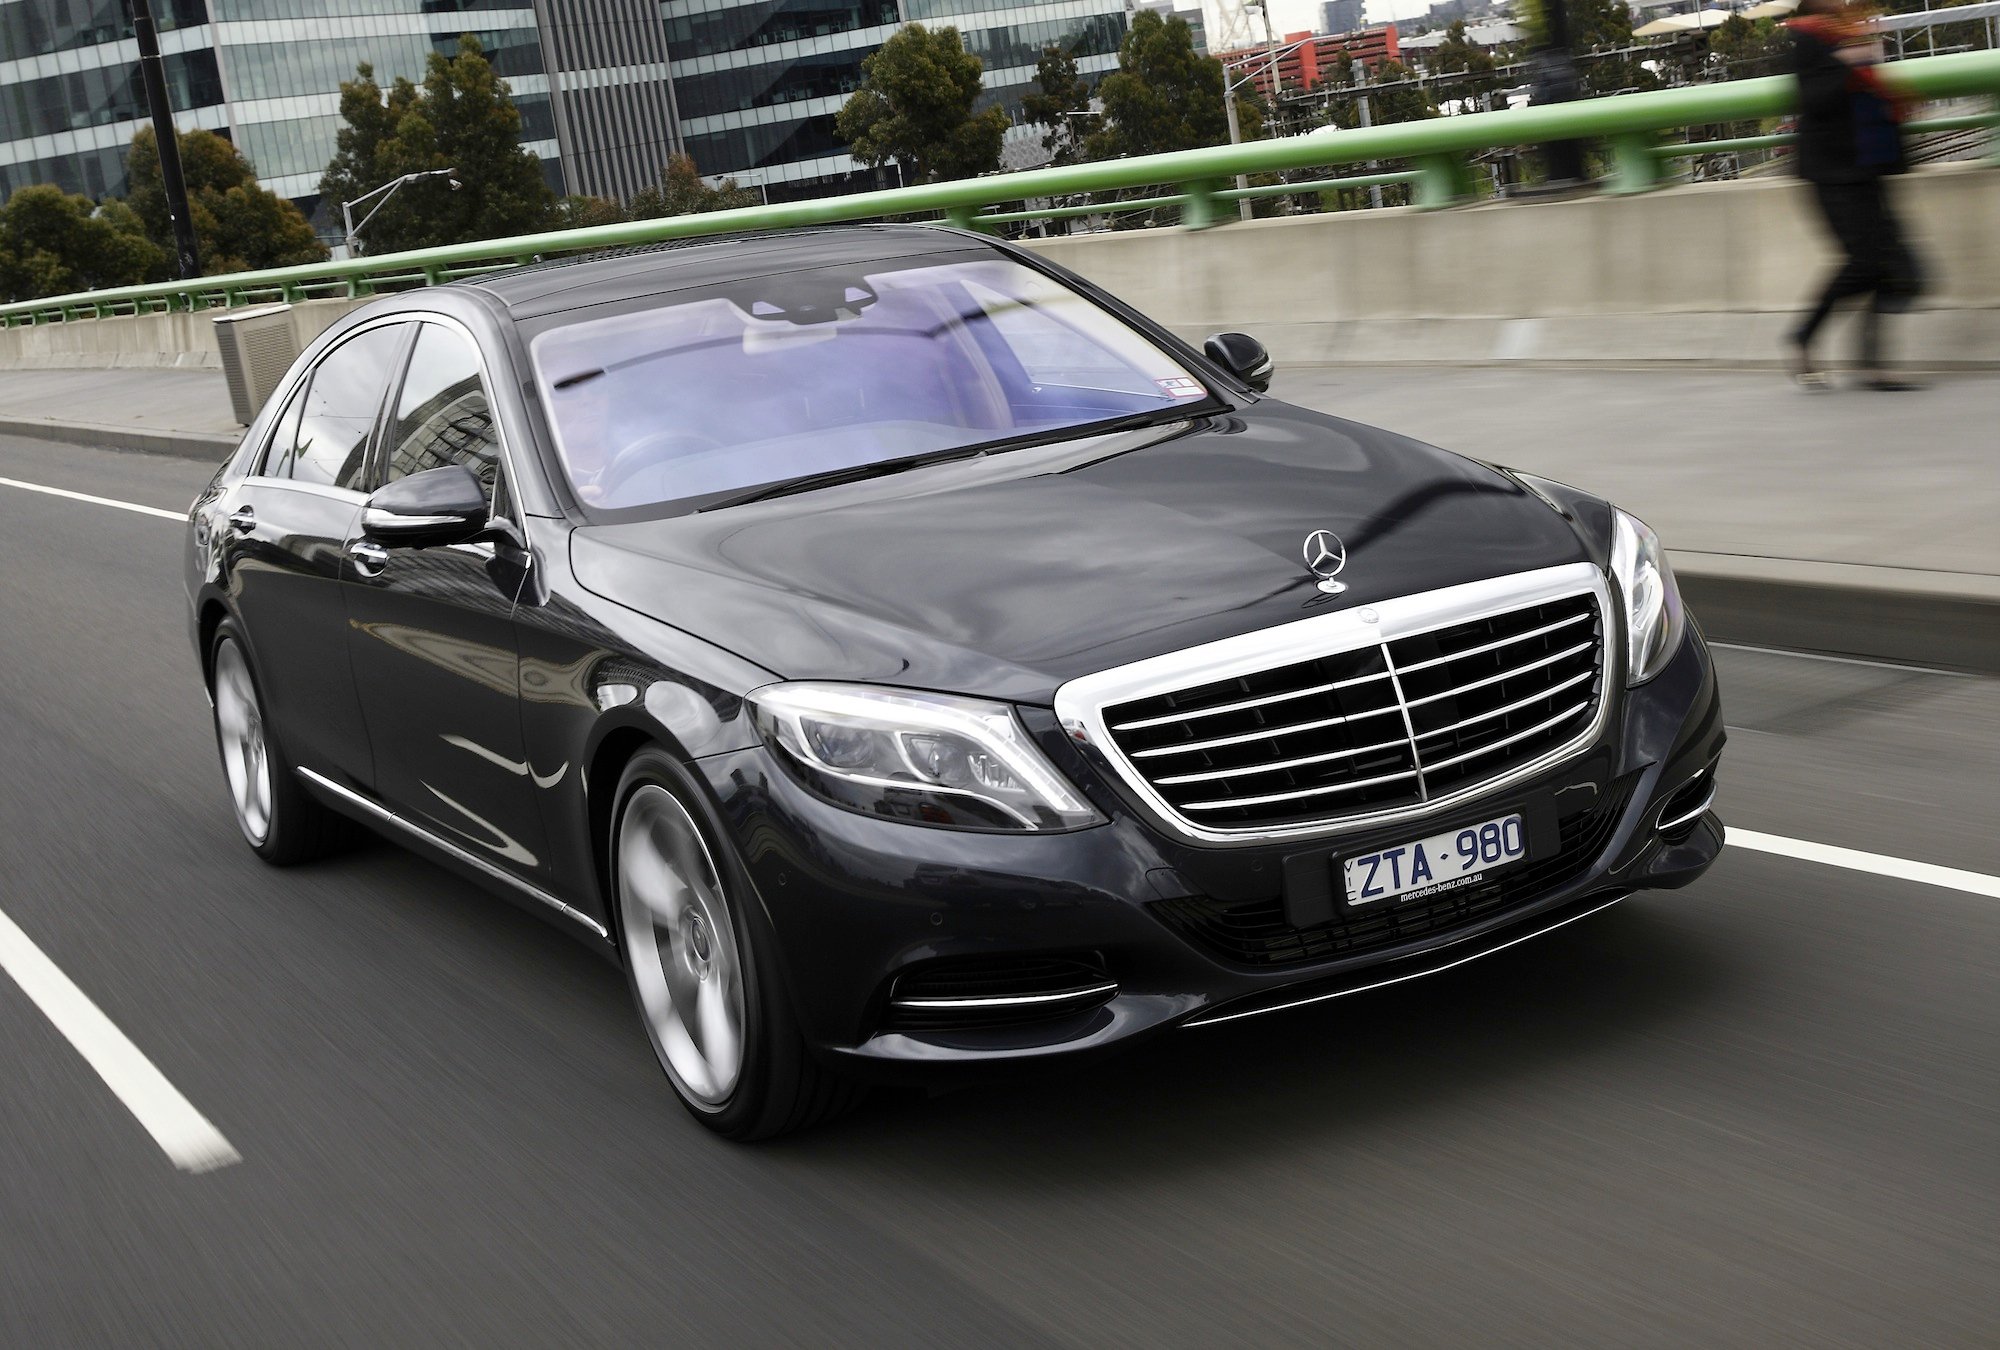 Мерседес s500 4matic. Мерседес s500 2015. Mercedes Benz s class s500. Мерседес бенц s500